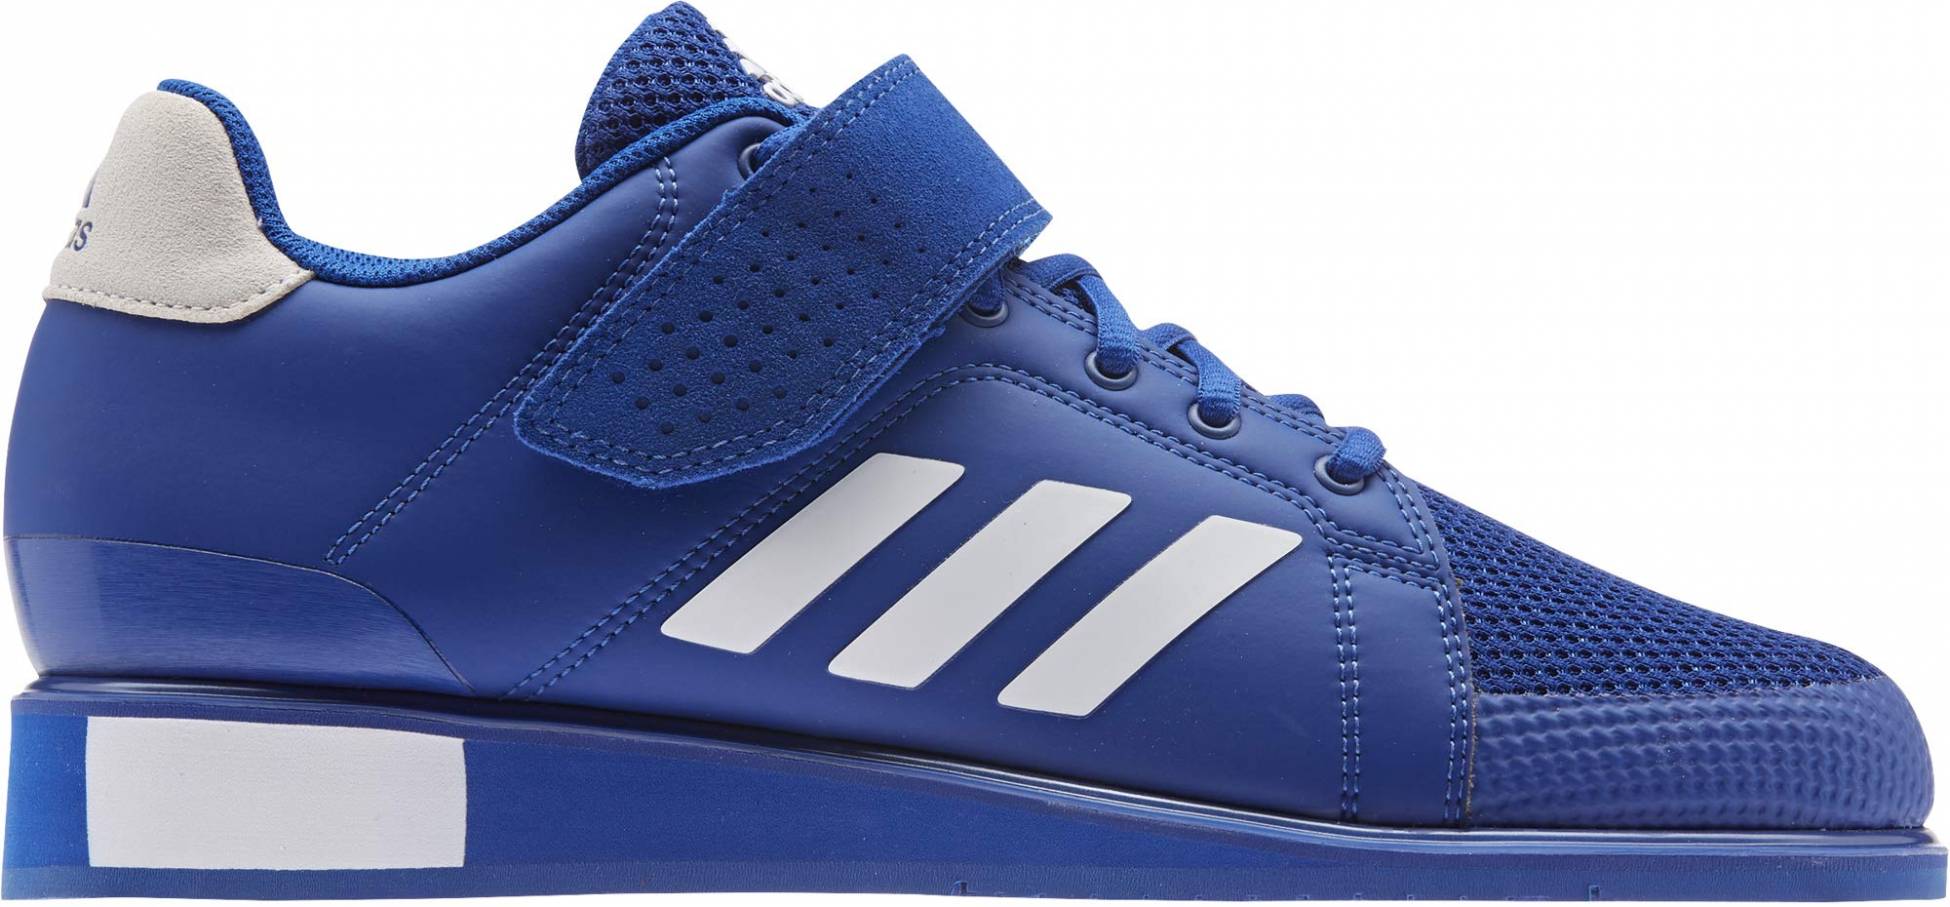 adidas weightlifting shoes blue